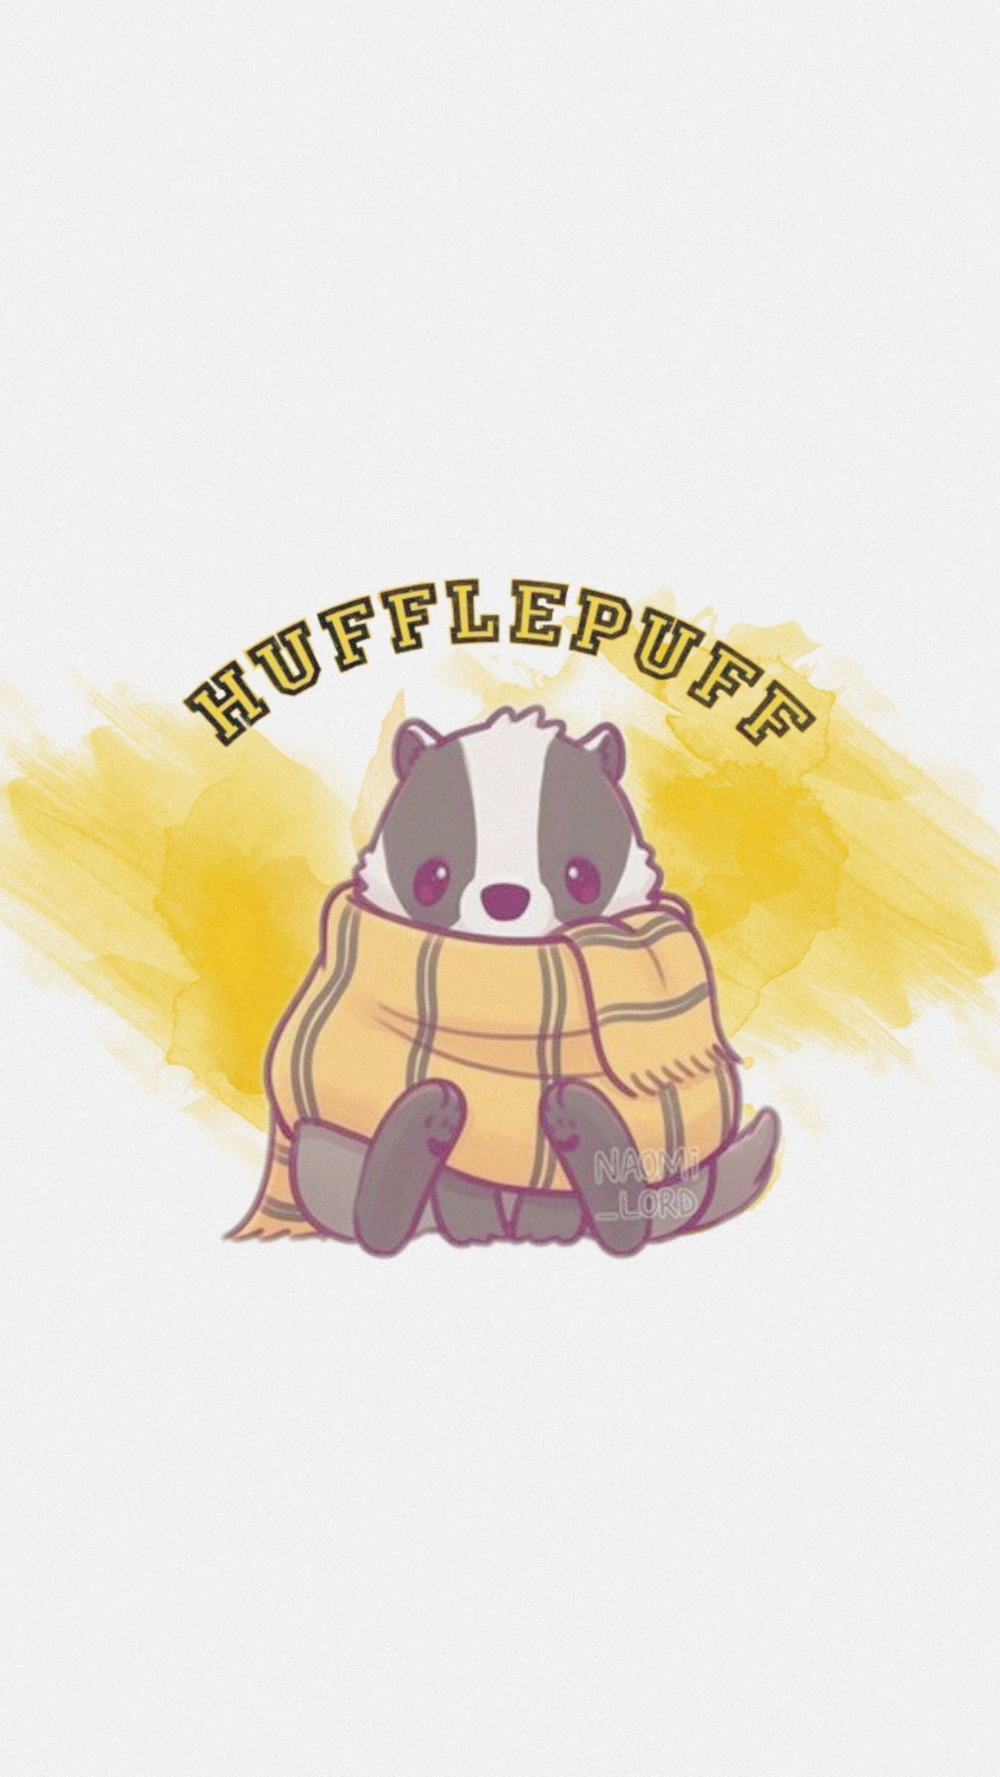 Hufflepuff. Harry potter drawings, Harry potter picture, Harry potter wallpaper